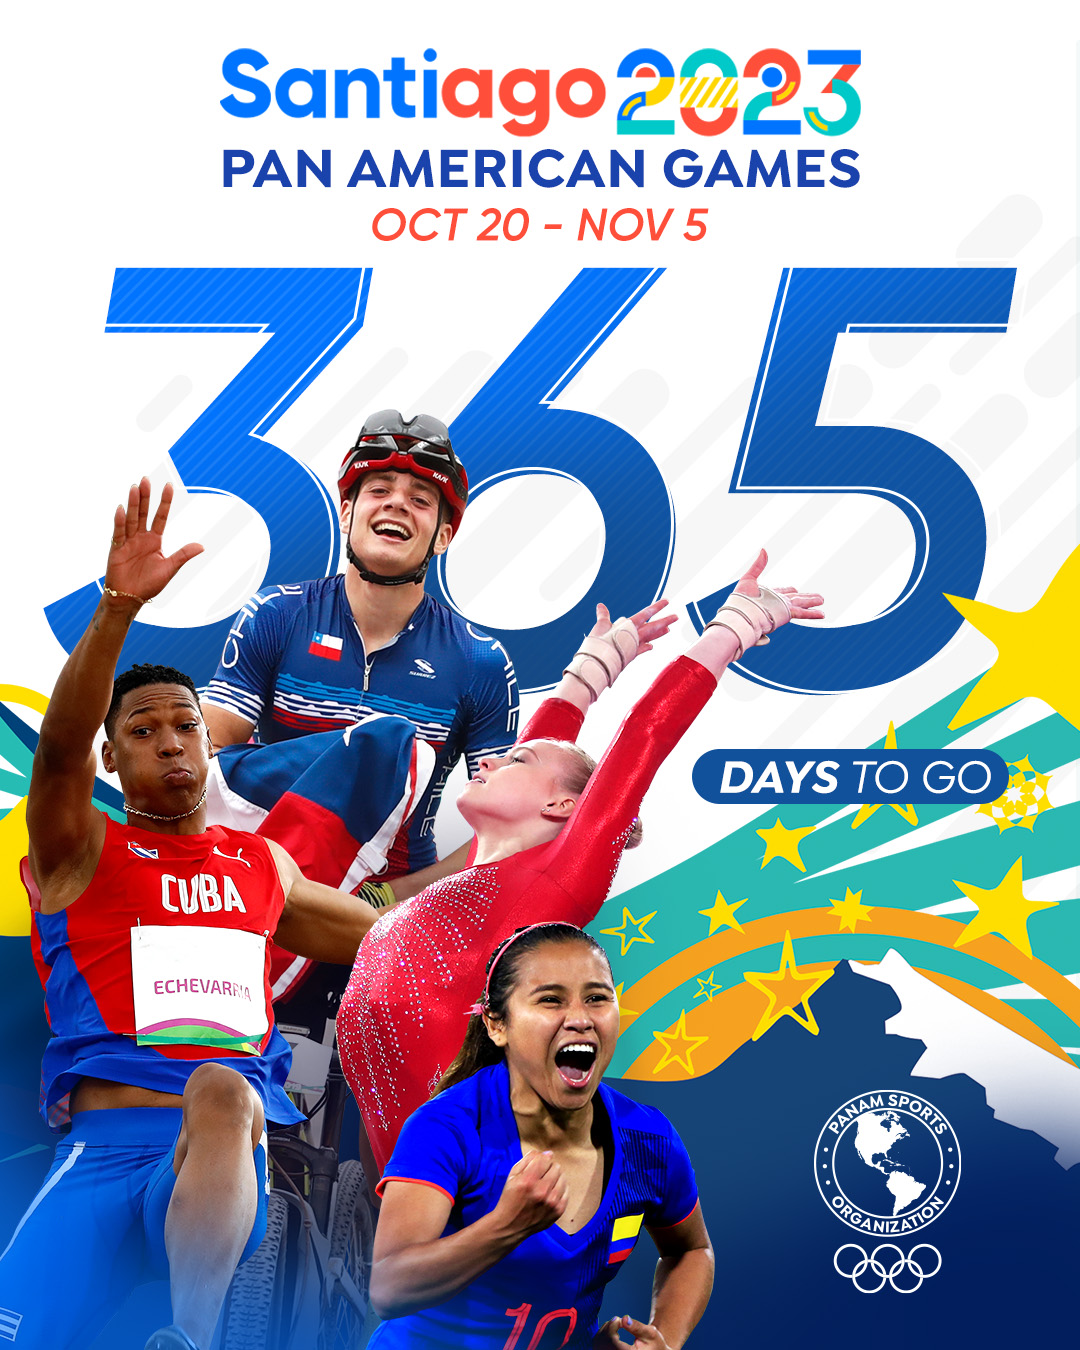 The One Year Countdown to the Santiago 2023 Pan American Games has officially begun as athletes prepare for the continent’s most important multisport event that will be held for the first time on Chilean soil.(Image via: panamsports.org)